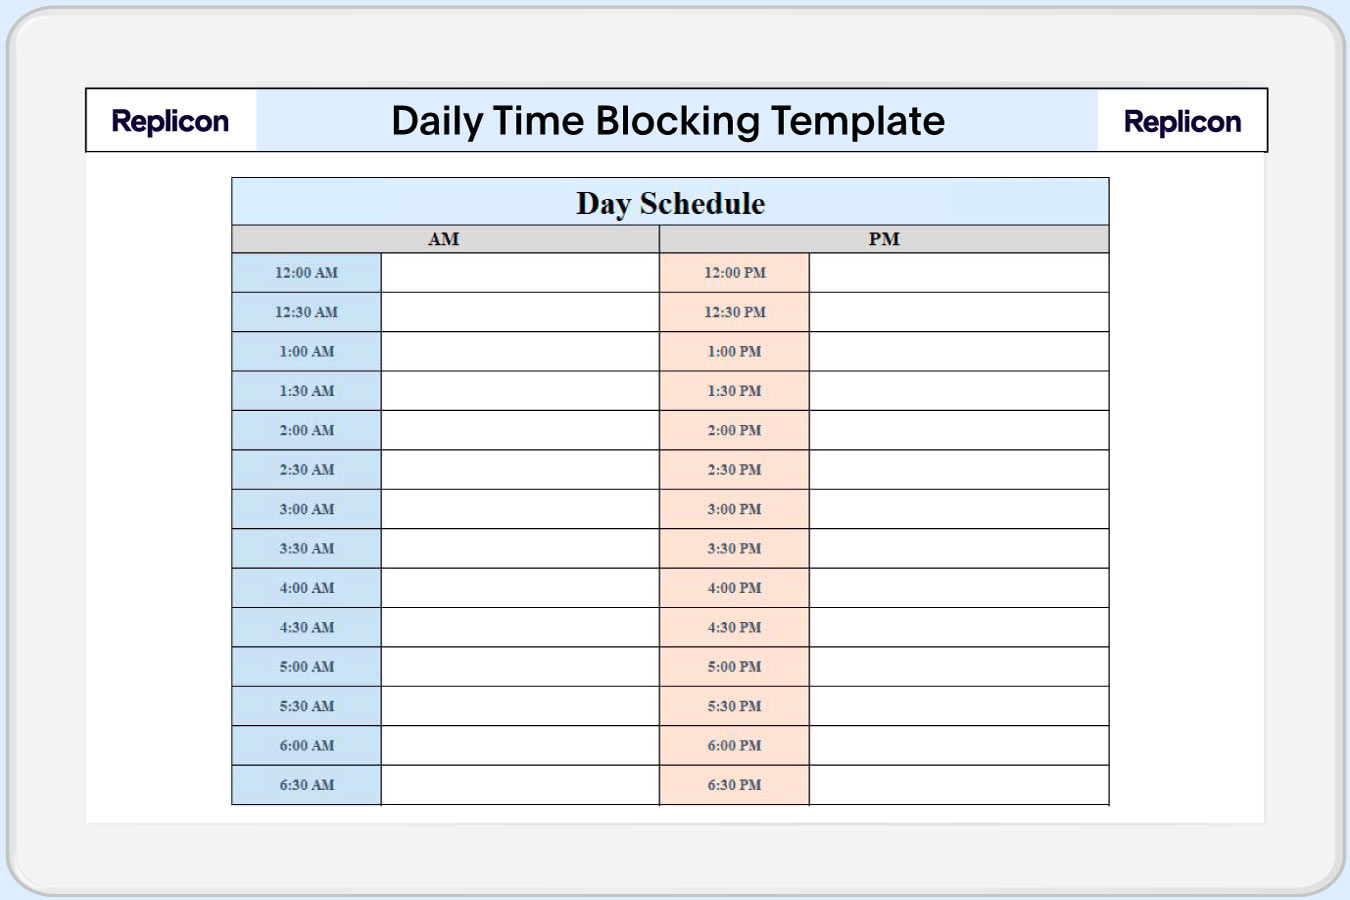 a preview of daily time blocking template from Replicon